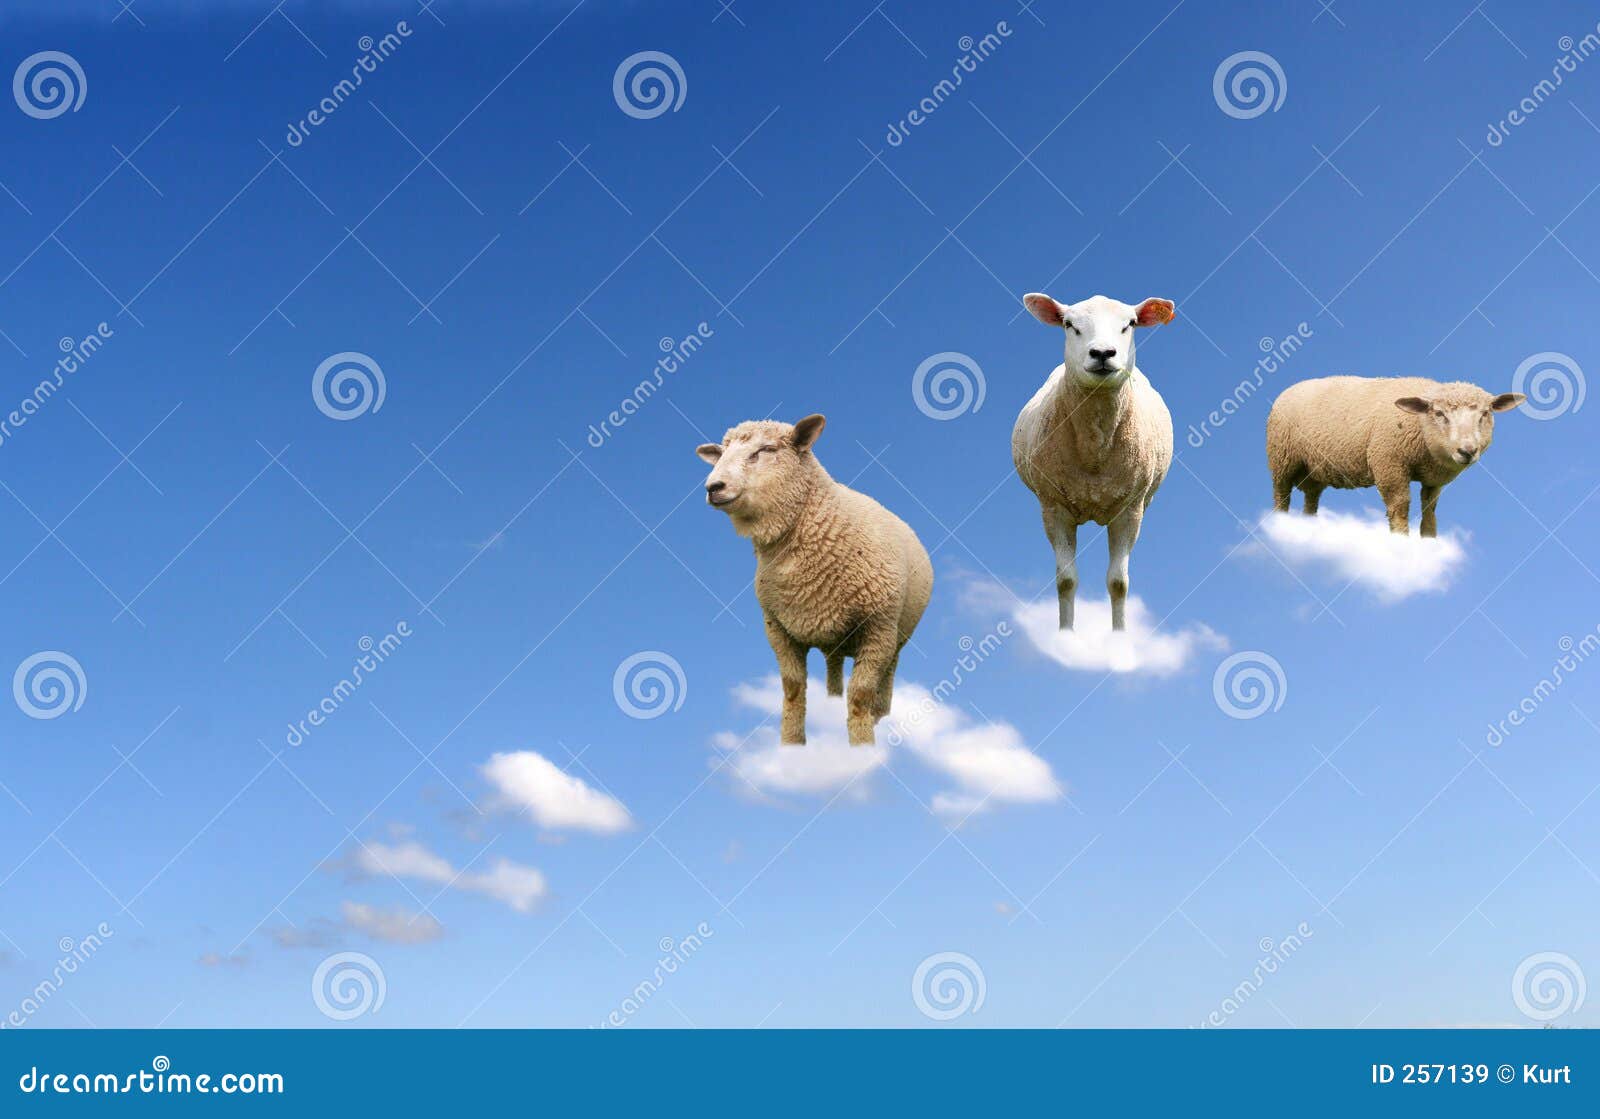 sheep on clouds